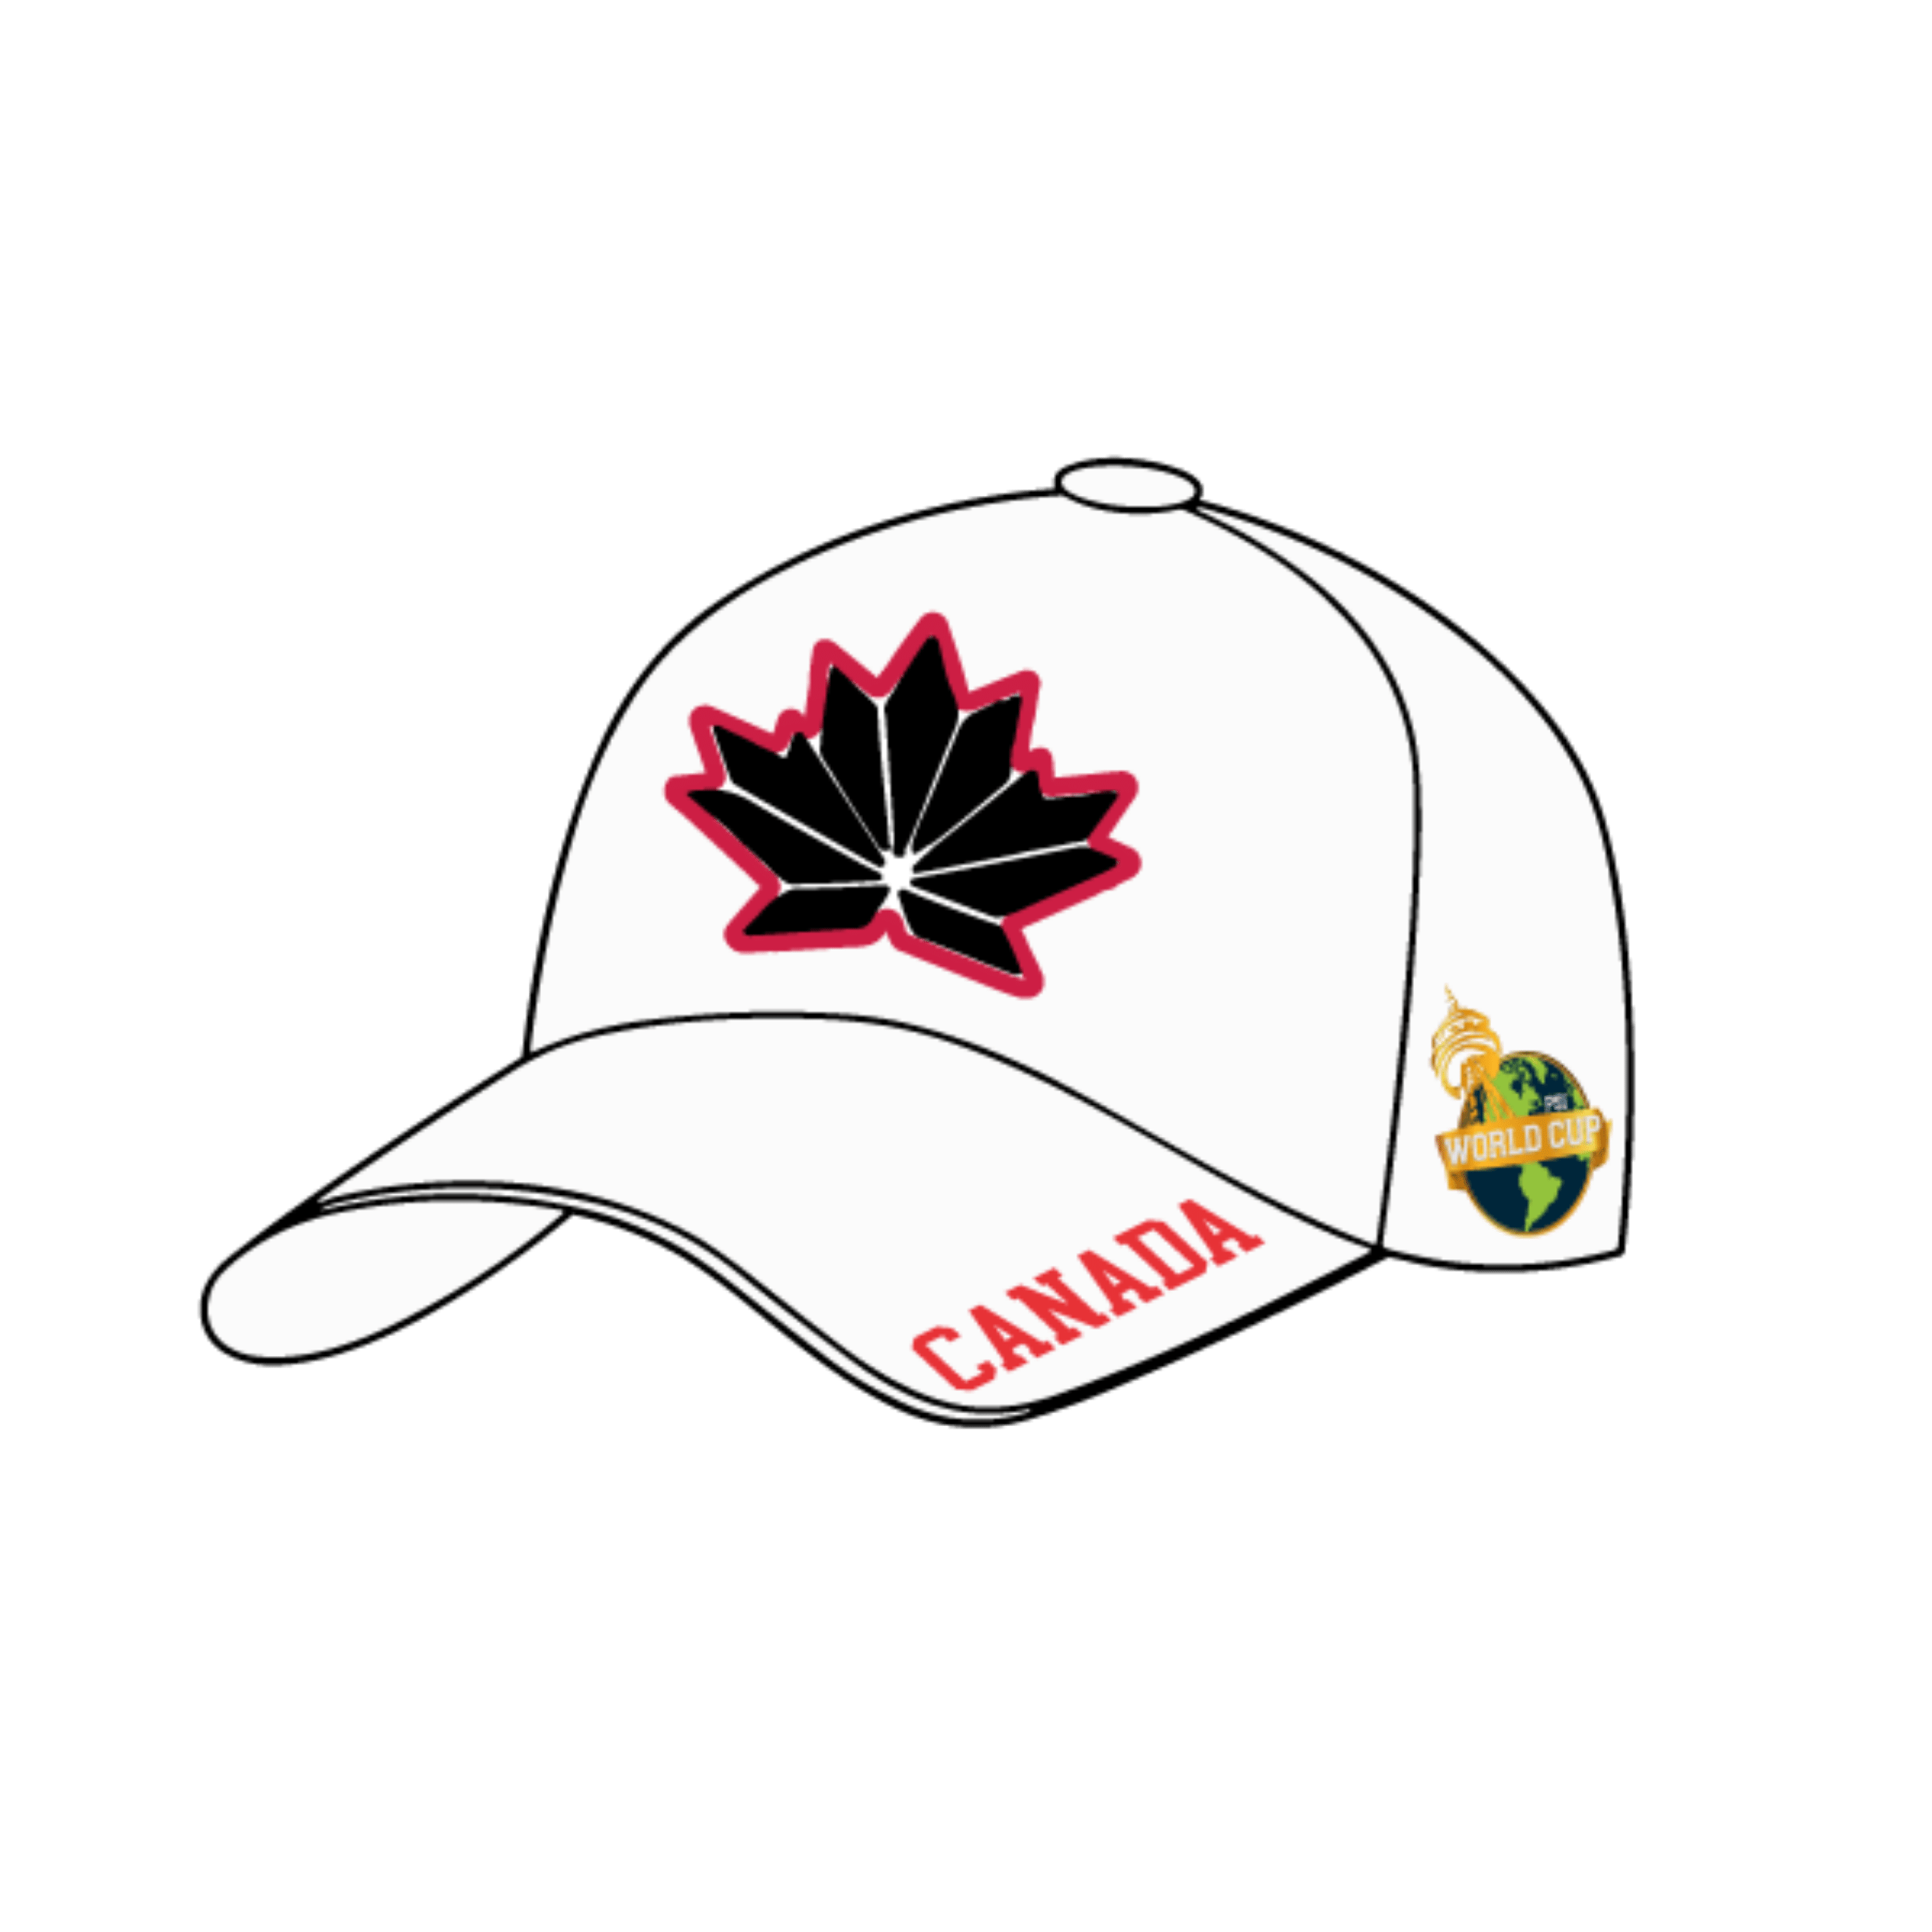 Canada White World Cup Gold Bundle